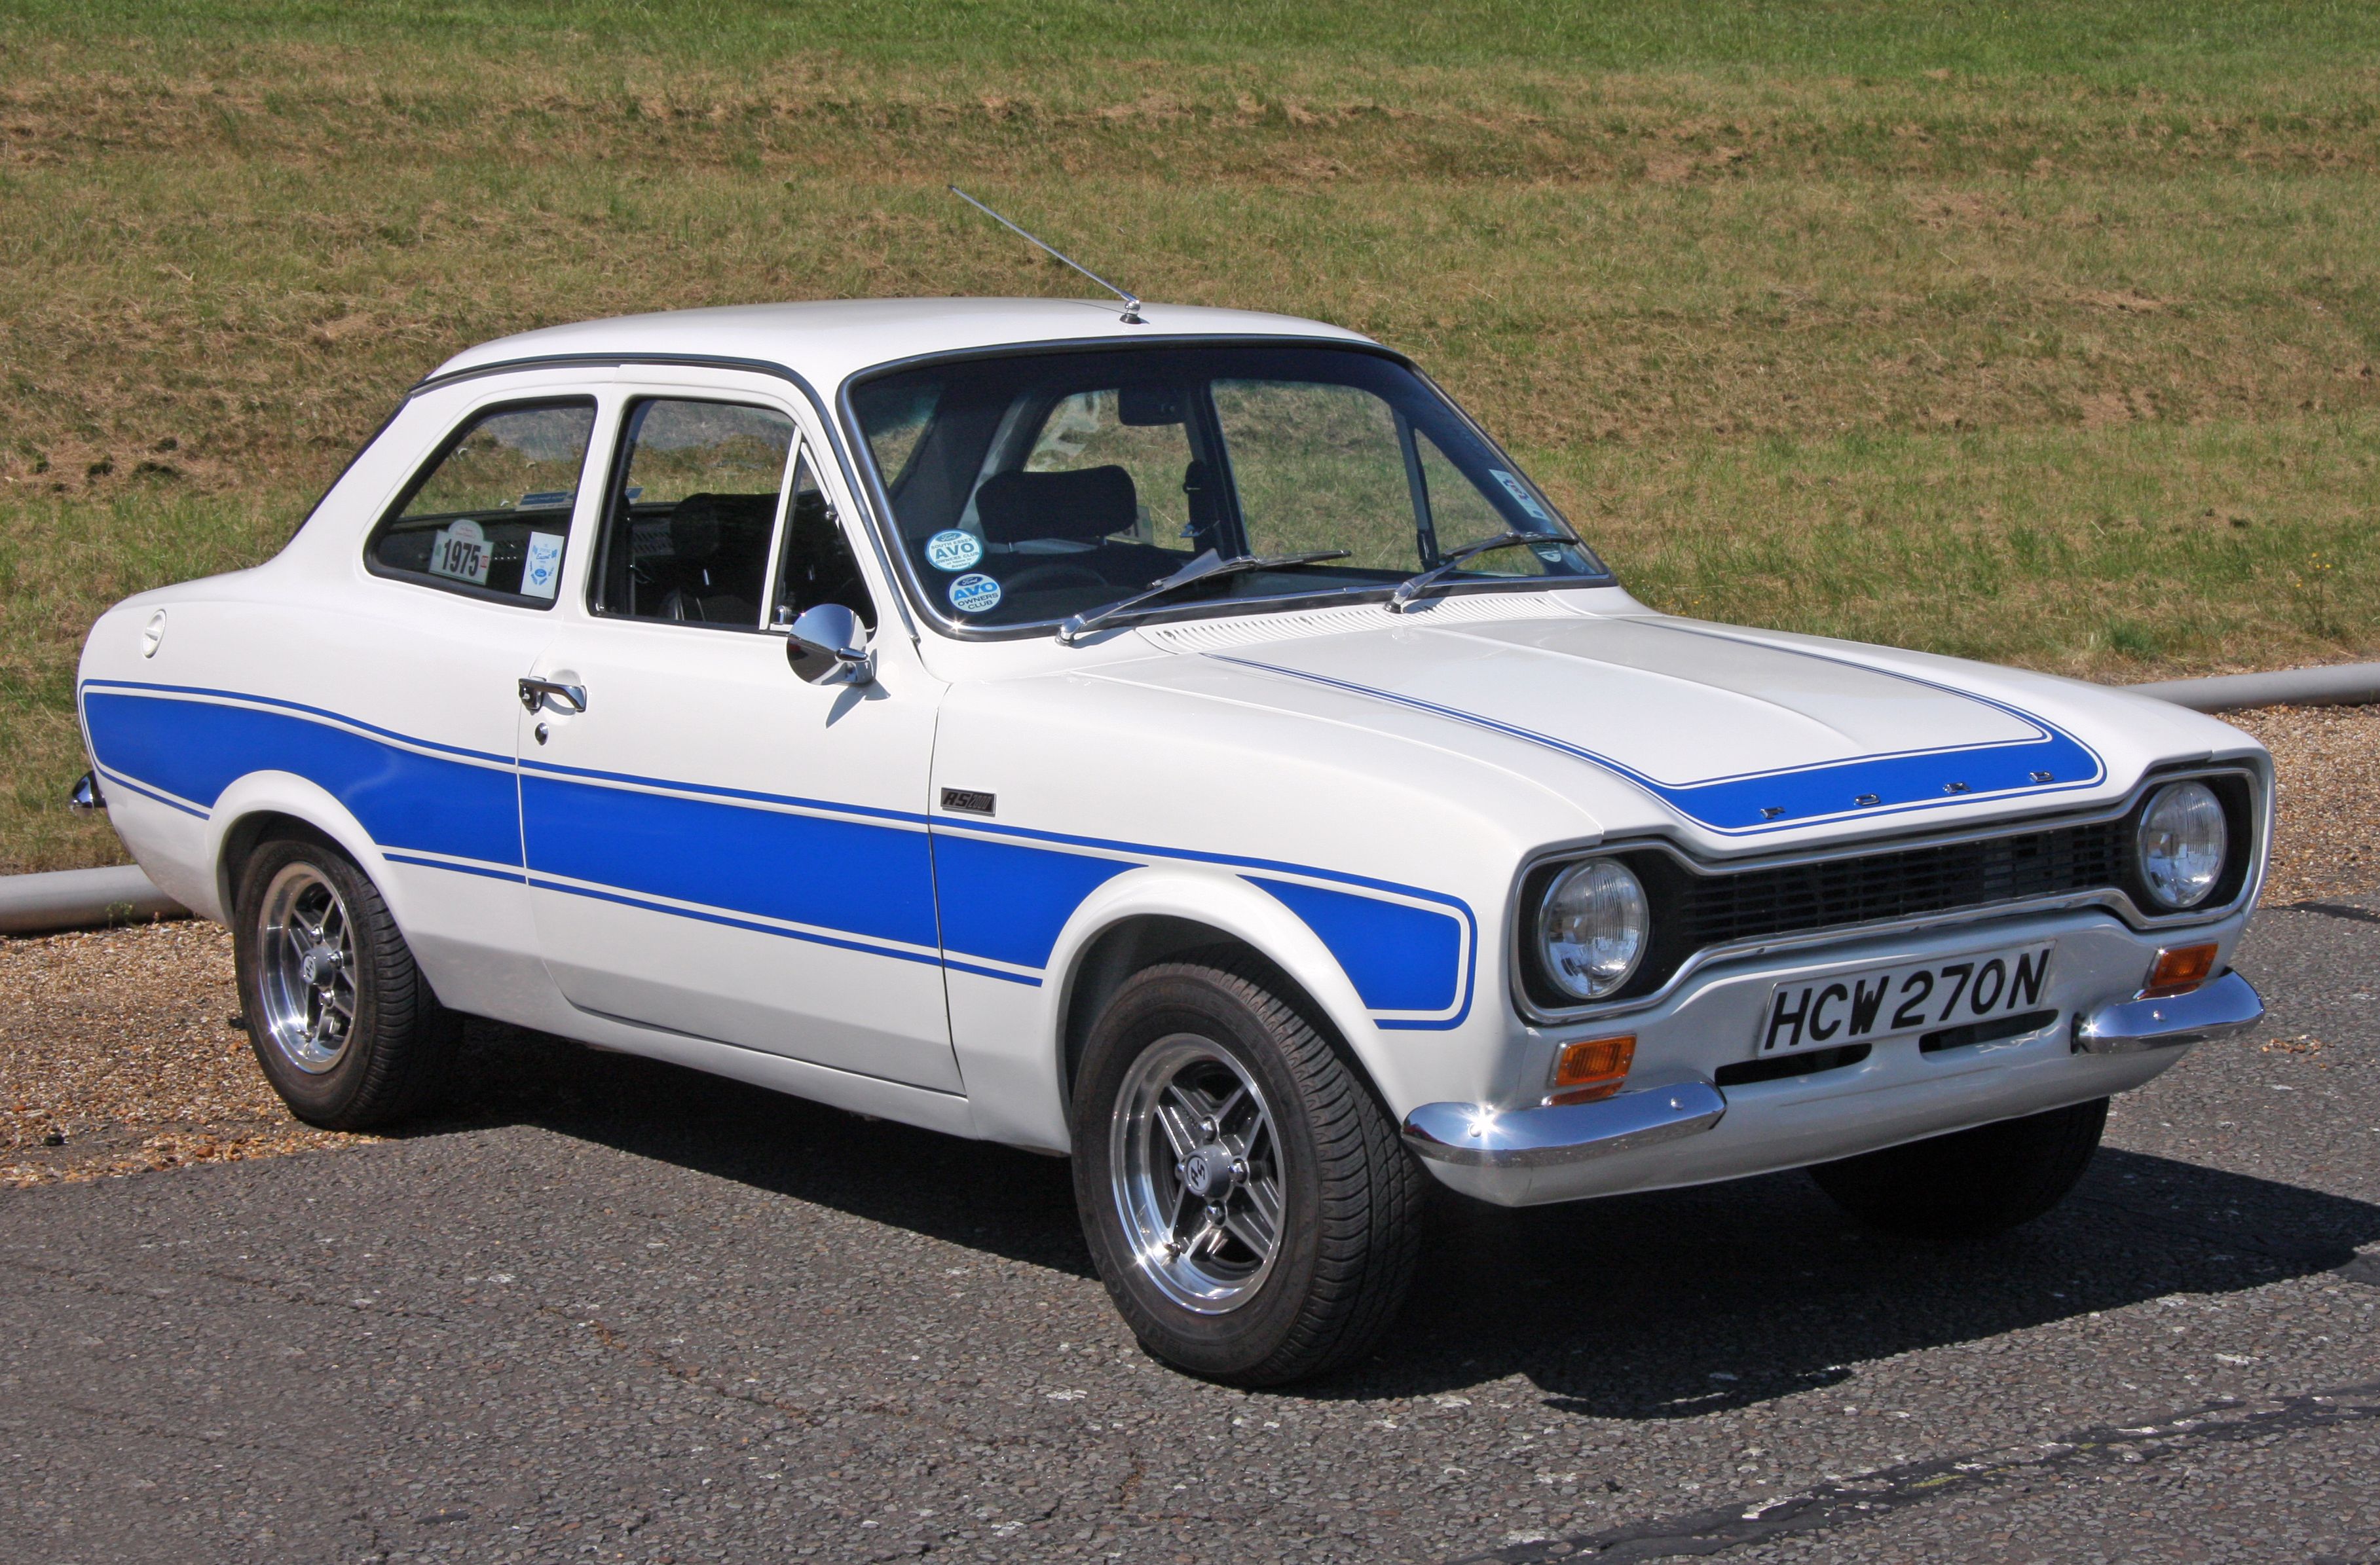 Ford Escort Photo and Wallpaper